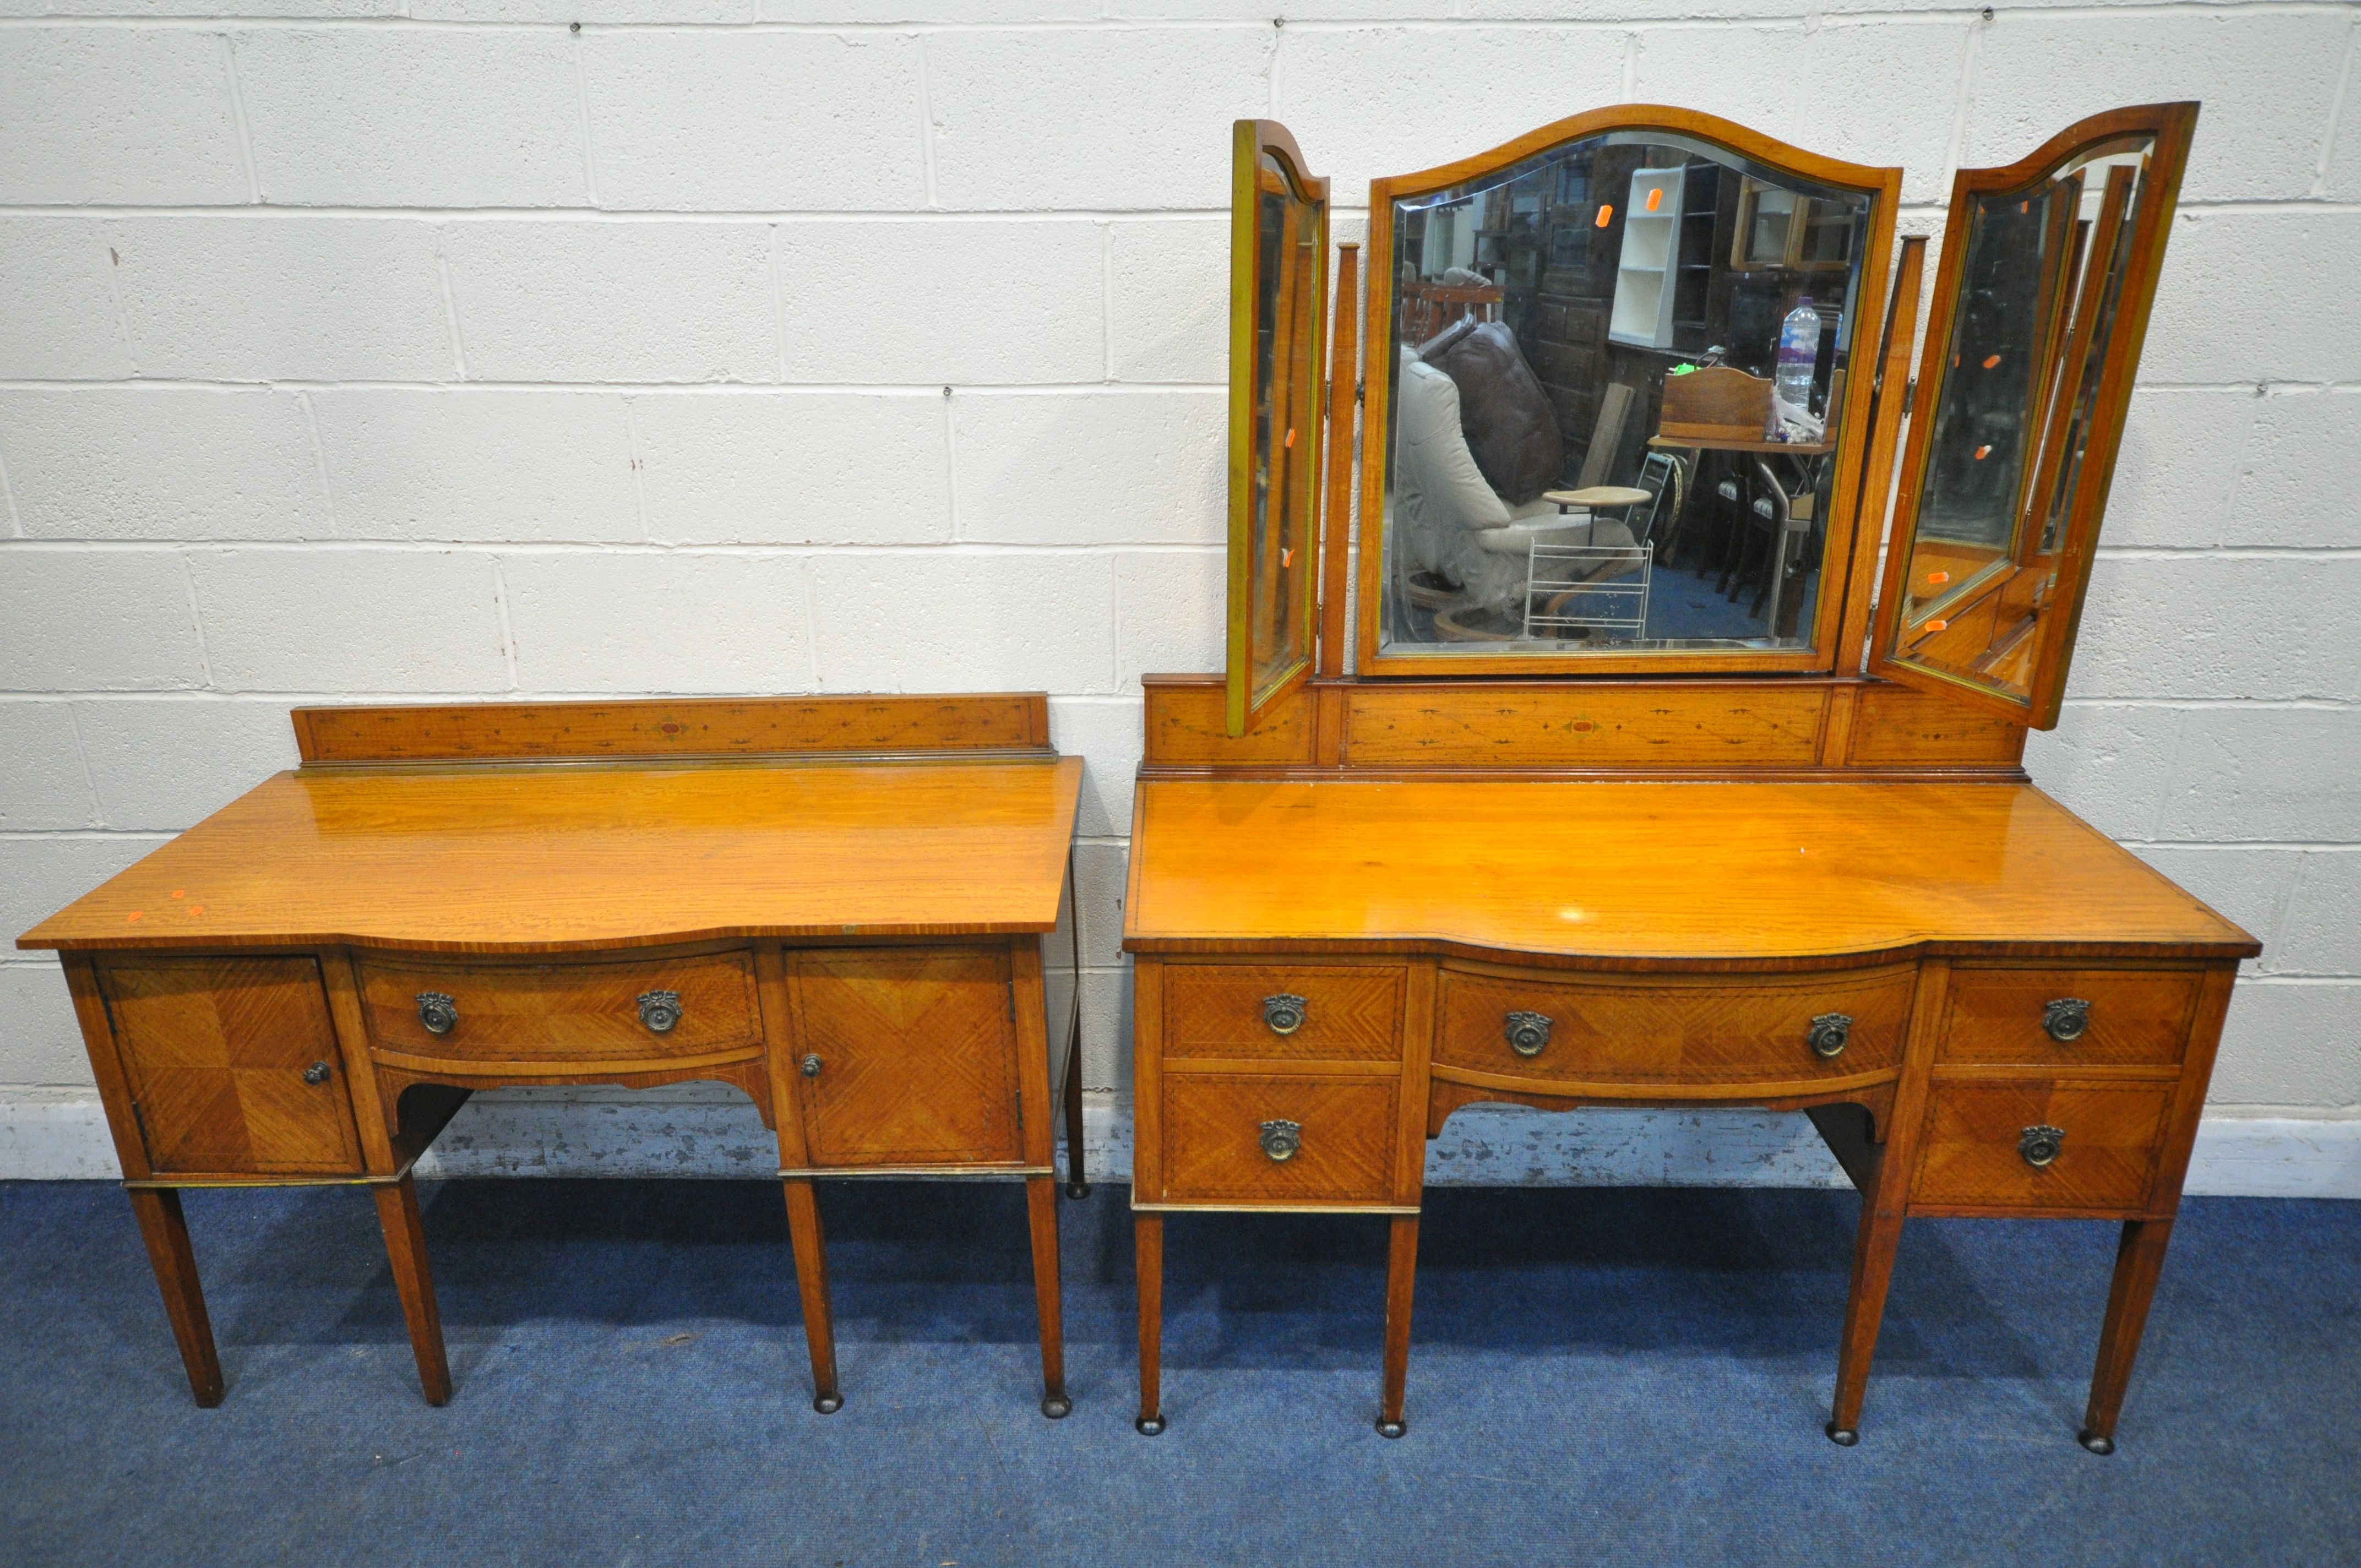 A LATE 19TH CENTURY SHERATON STYLE SATINWOOD AND MARQUETRY INLAID DRESSING TABLE, with triple